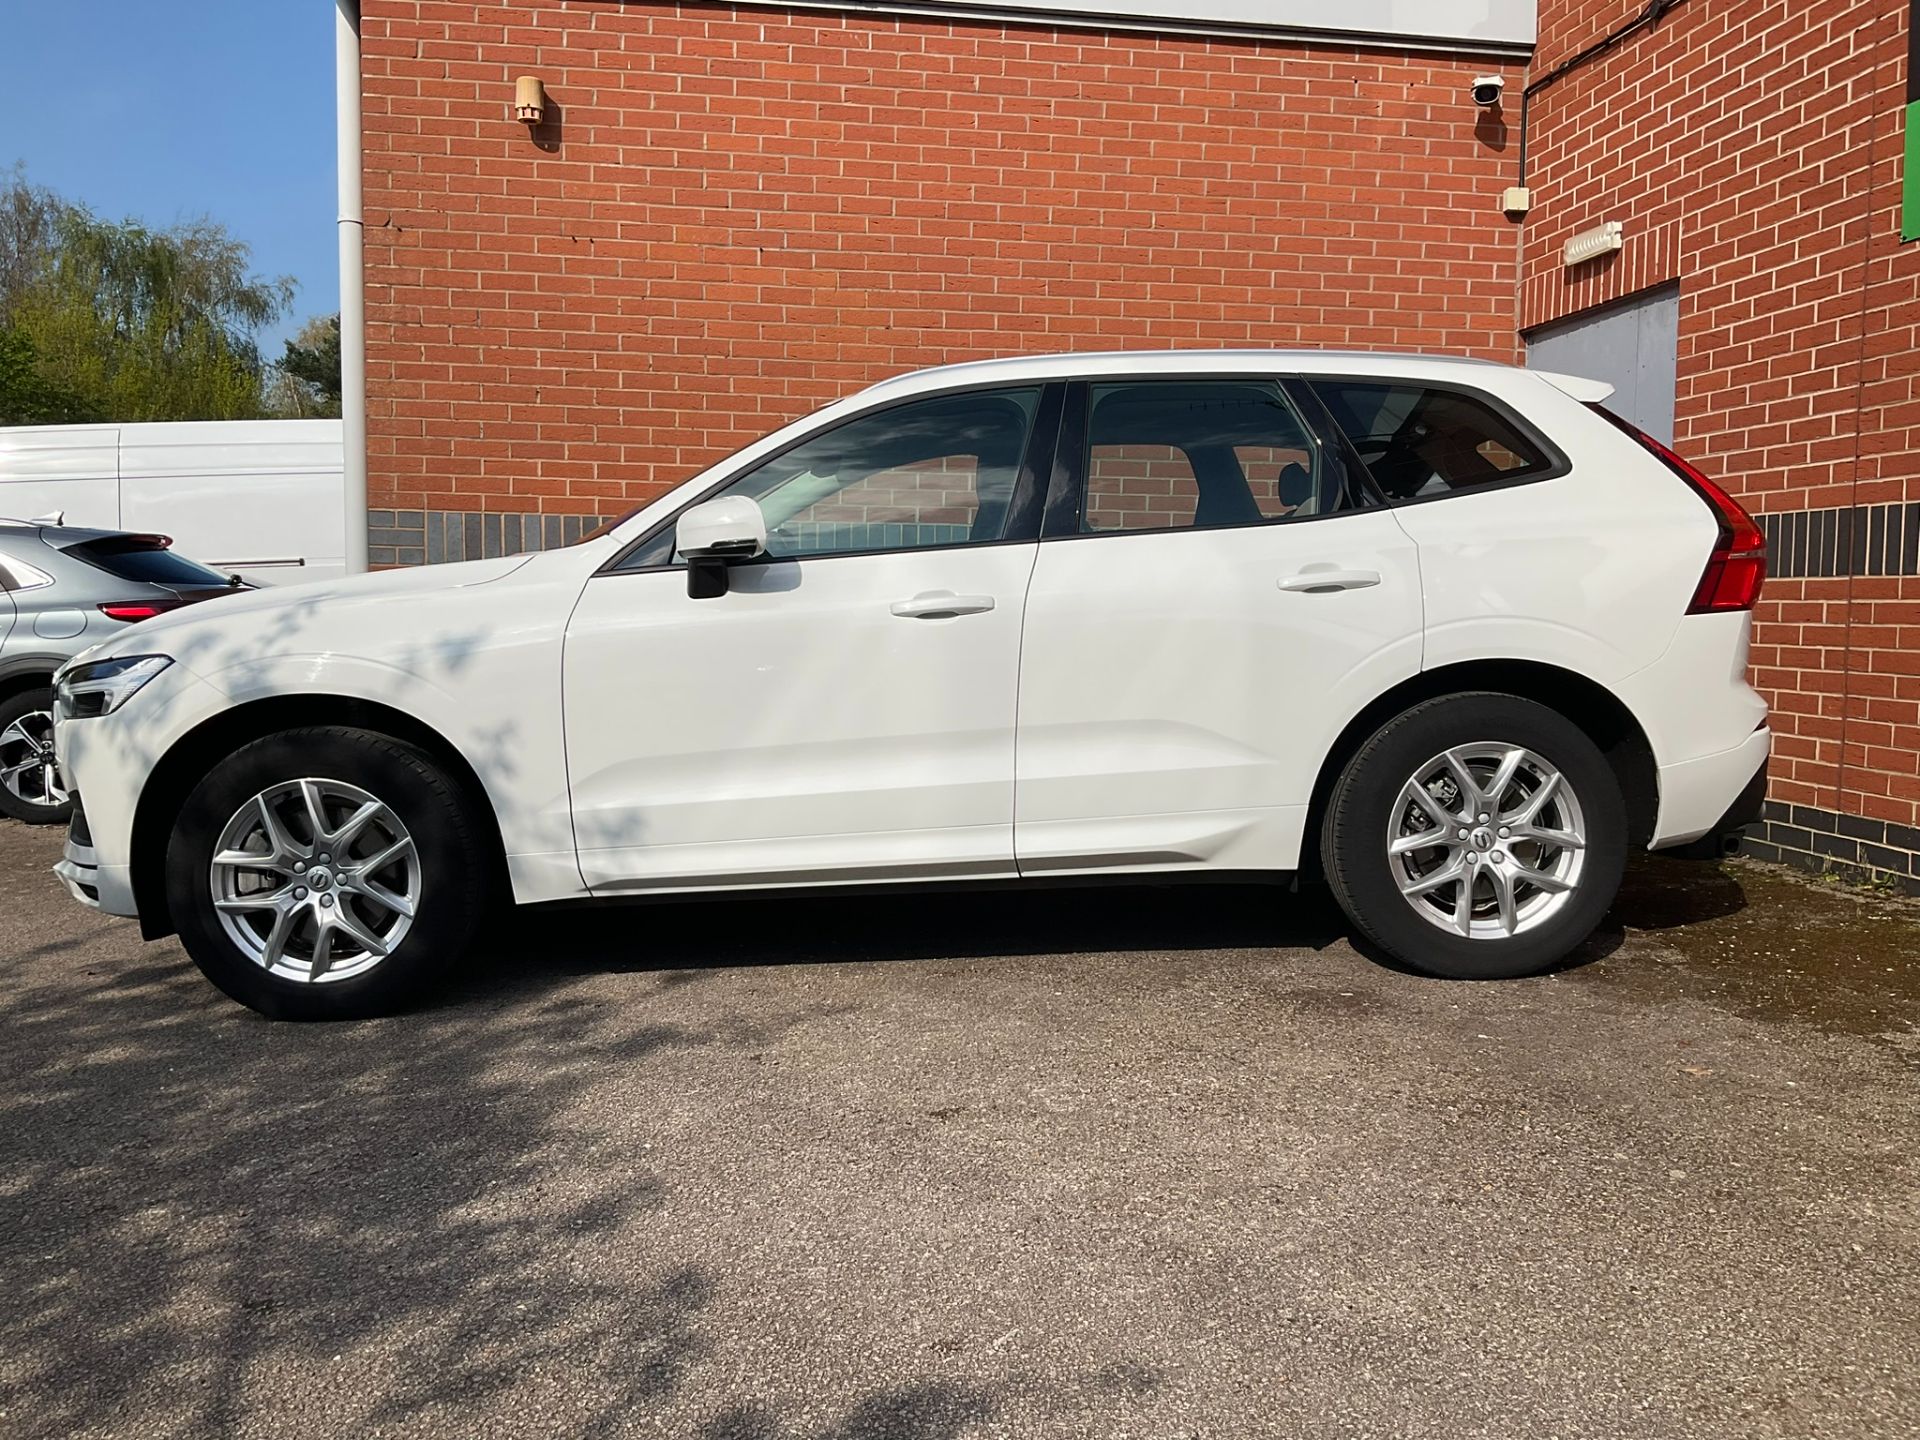 2021 Volvo Xc60 2.0 B5p [250] Momentum 5Dr Awd Geartronic (RX21ORO) Image 4